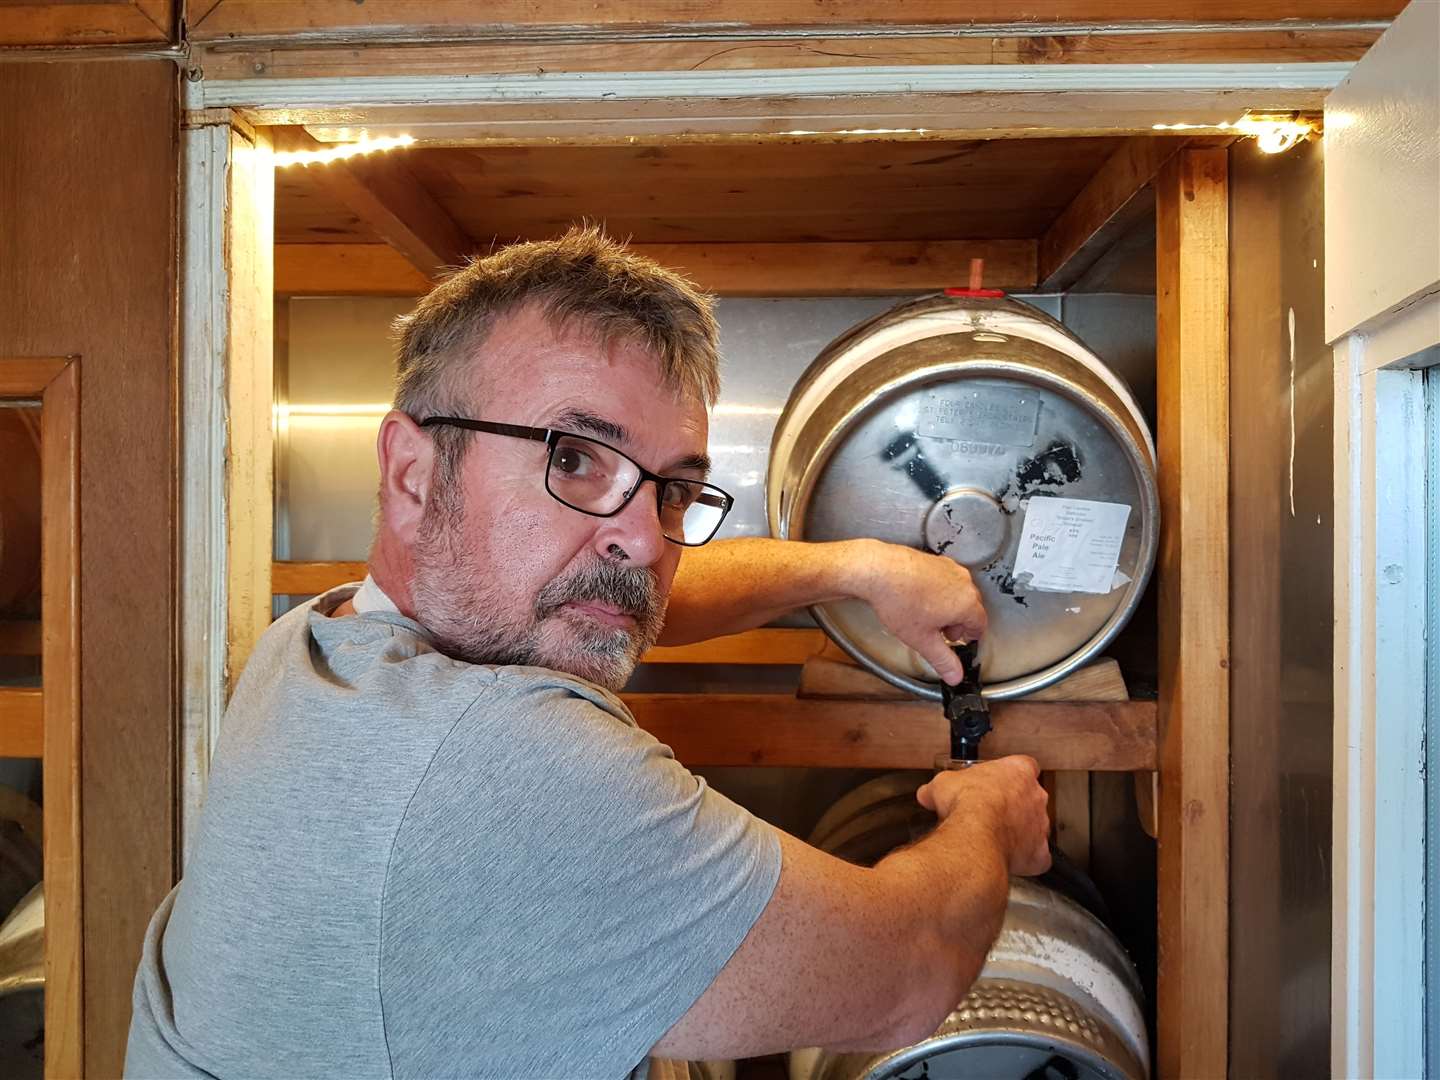 Mike Beaumont taps into one of his brews at the Four Candles brewpub in Broadstairs